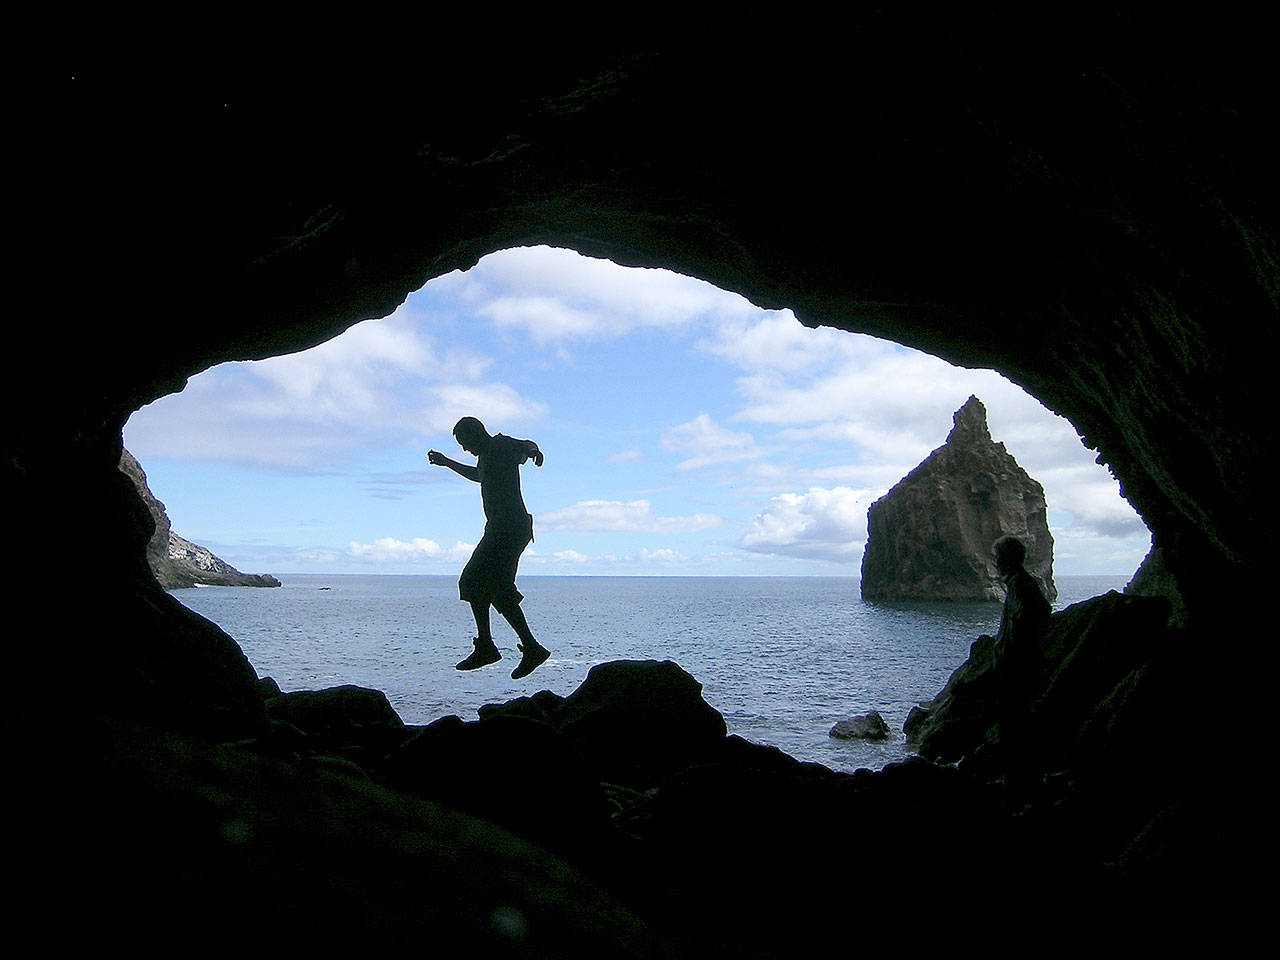 Swanley Cave is seen on the remote island of St. Helena in 2006. One of the world’s most remote places became a little less isolated Saturday when the first commercial flight arrived. (Edward Thorpe / St. Helena Tourism)